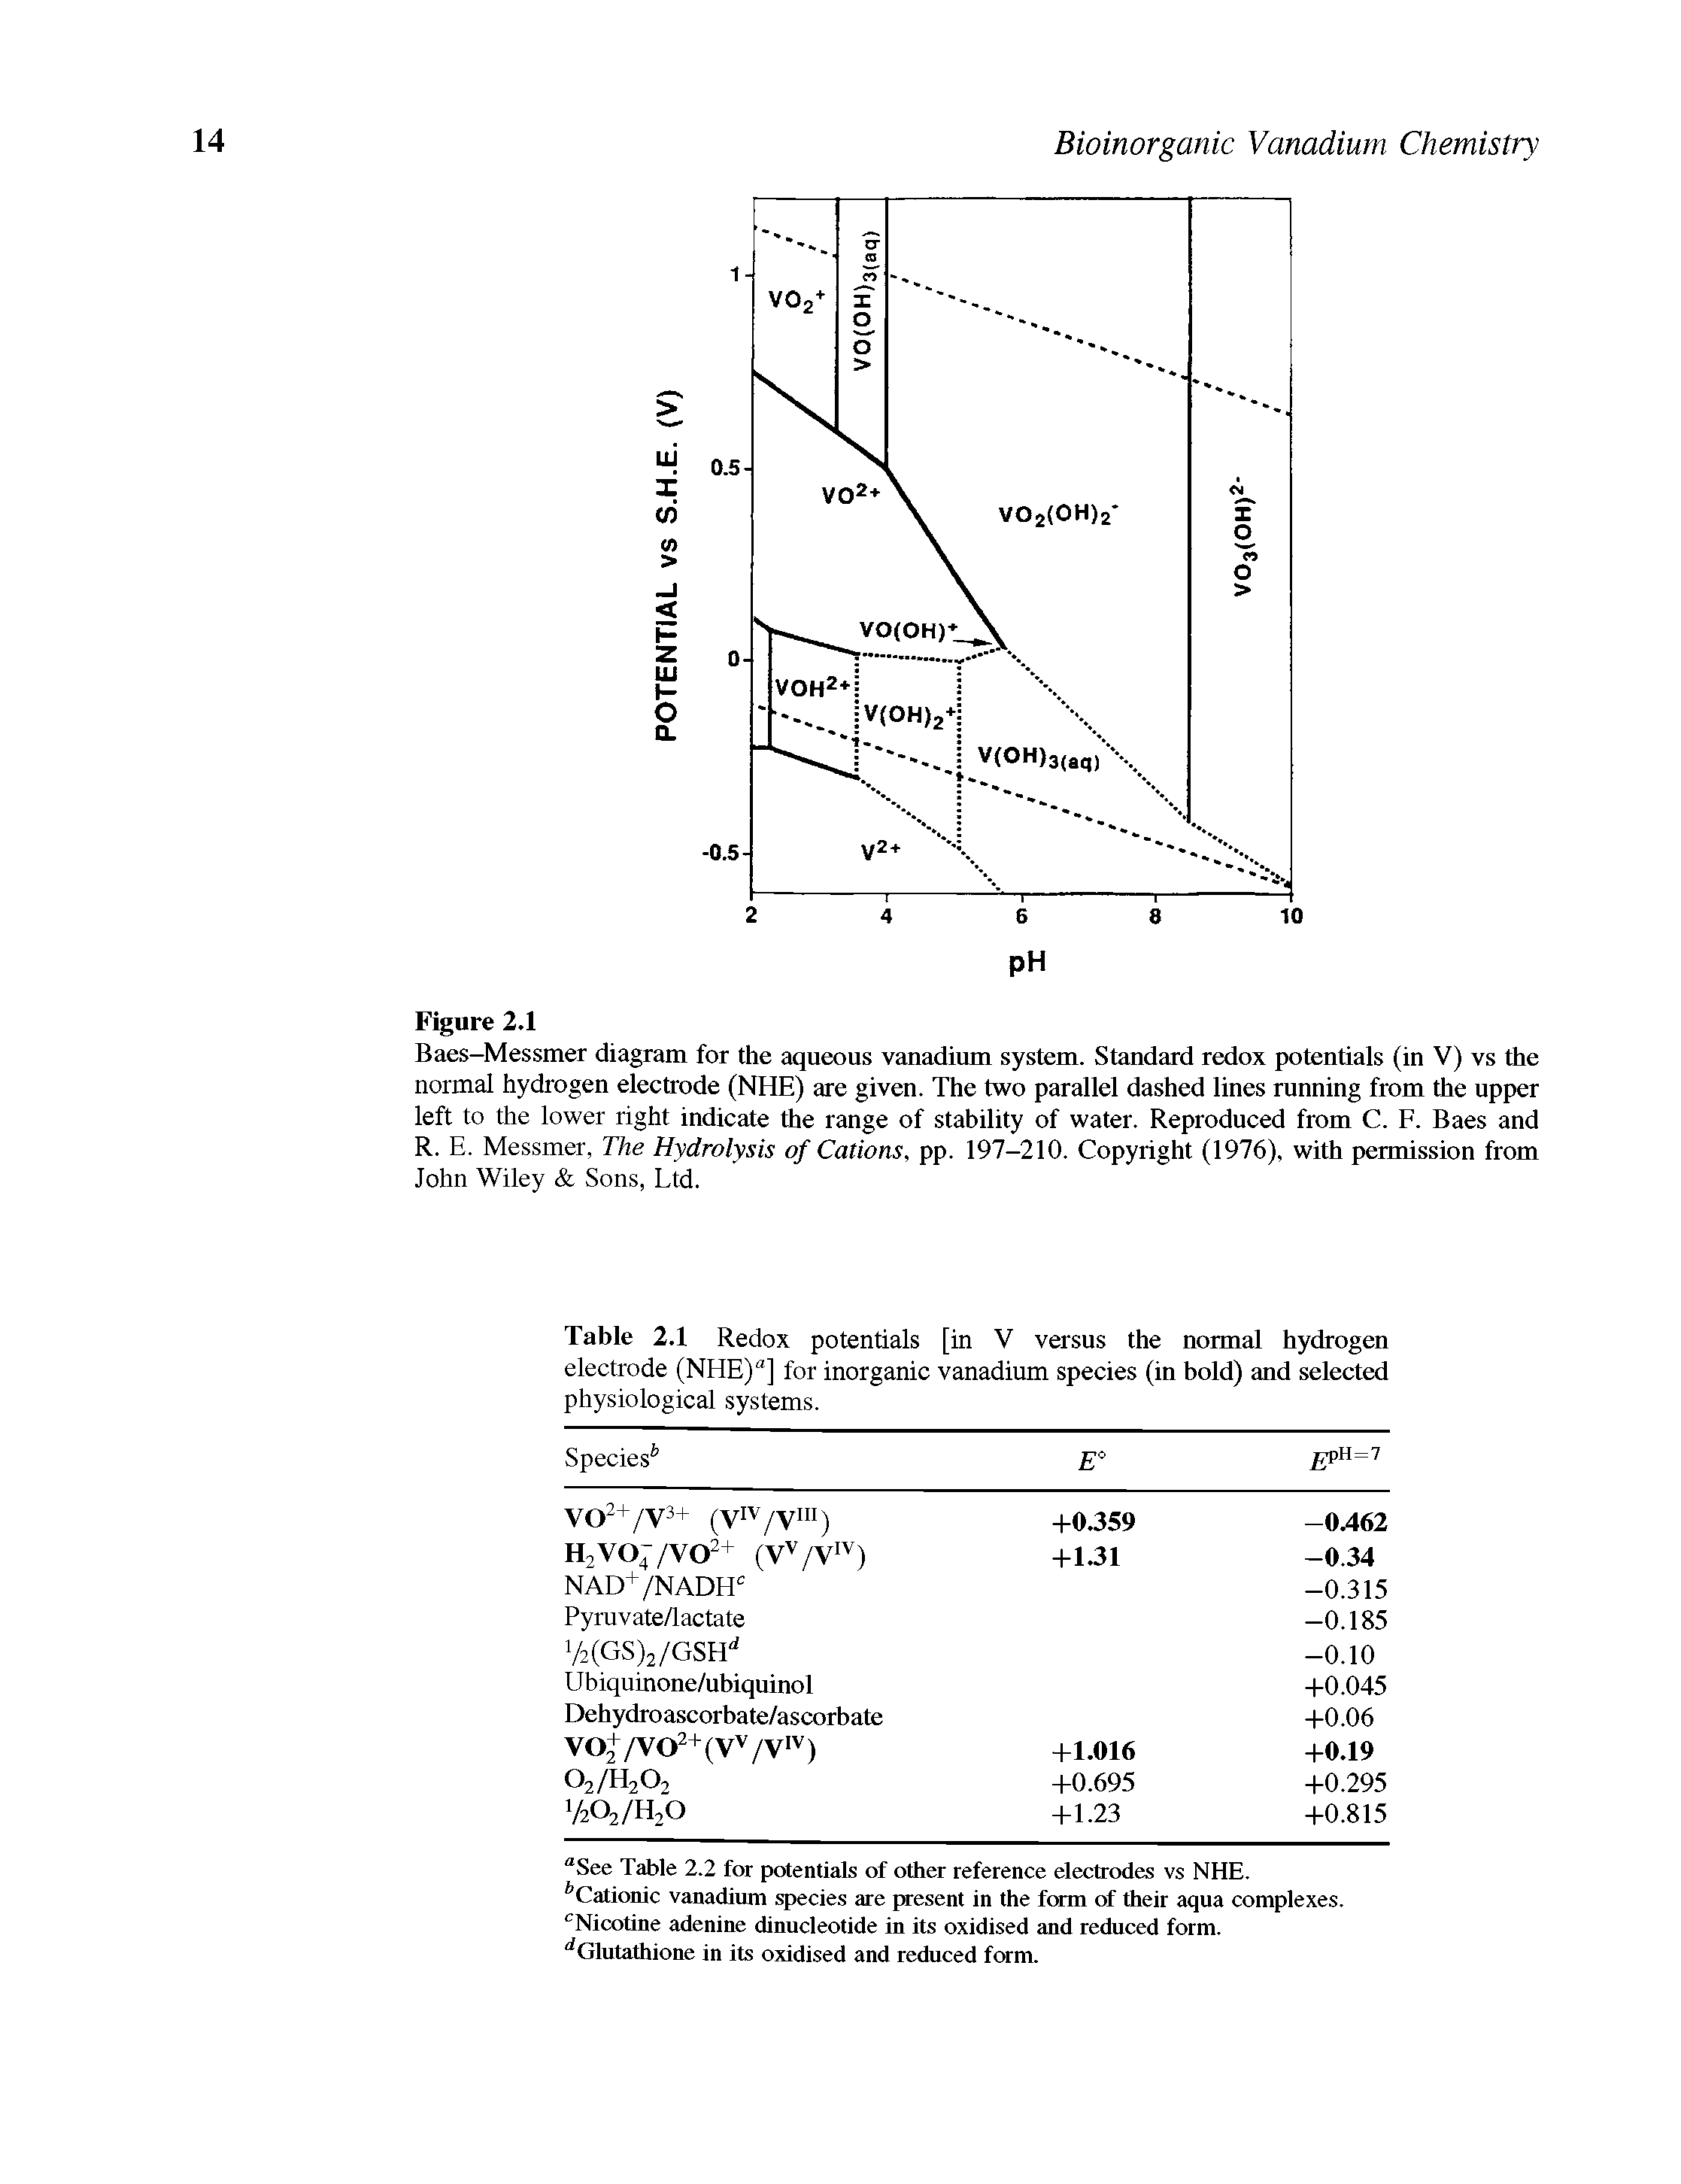 Table 2.1 Redox potentials [in V versus the normal hydrogen electrode (NHE)"] for inorganic vanadium species (in bold) and selected physiological systems.